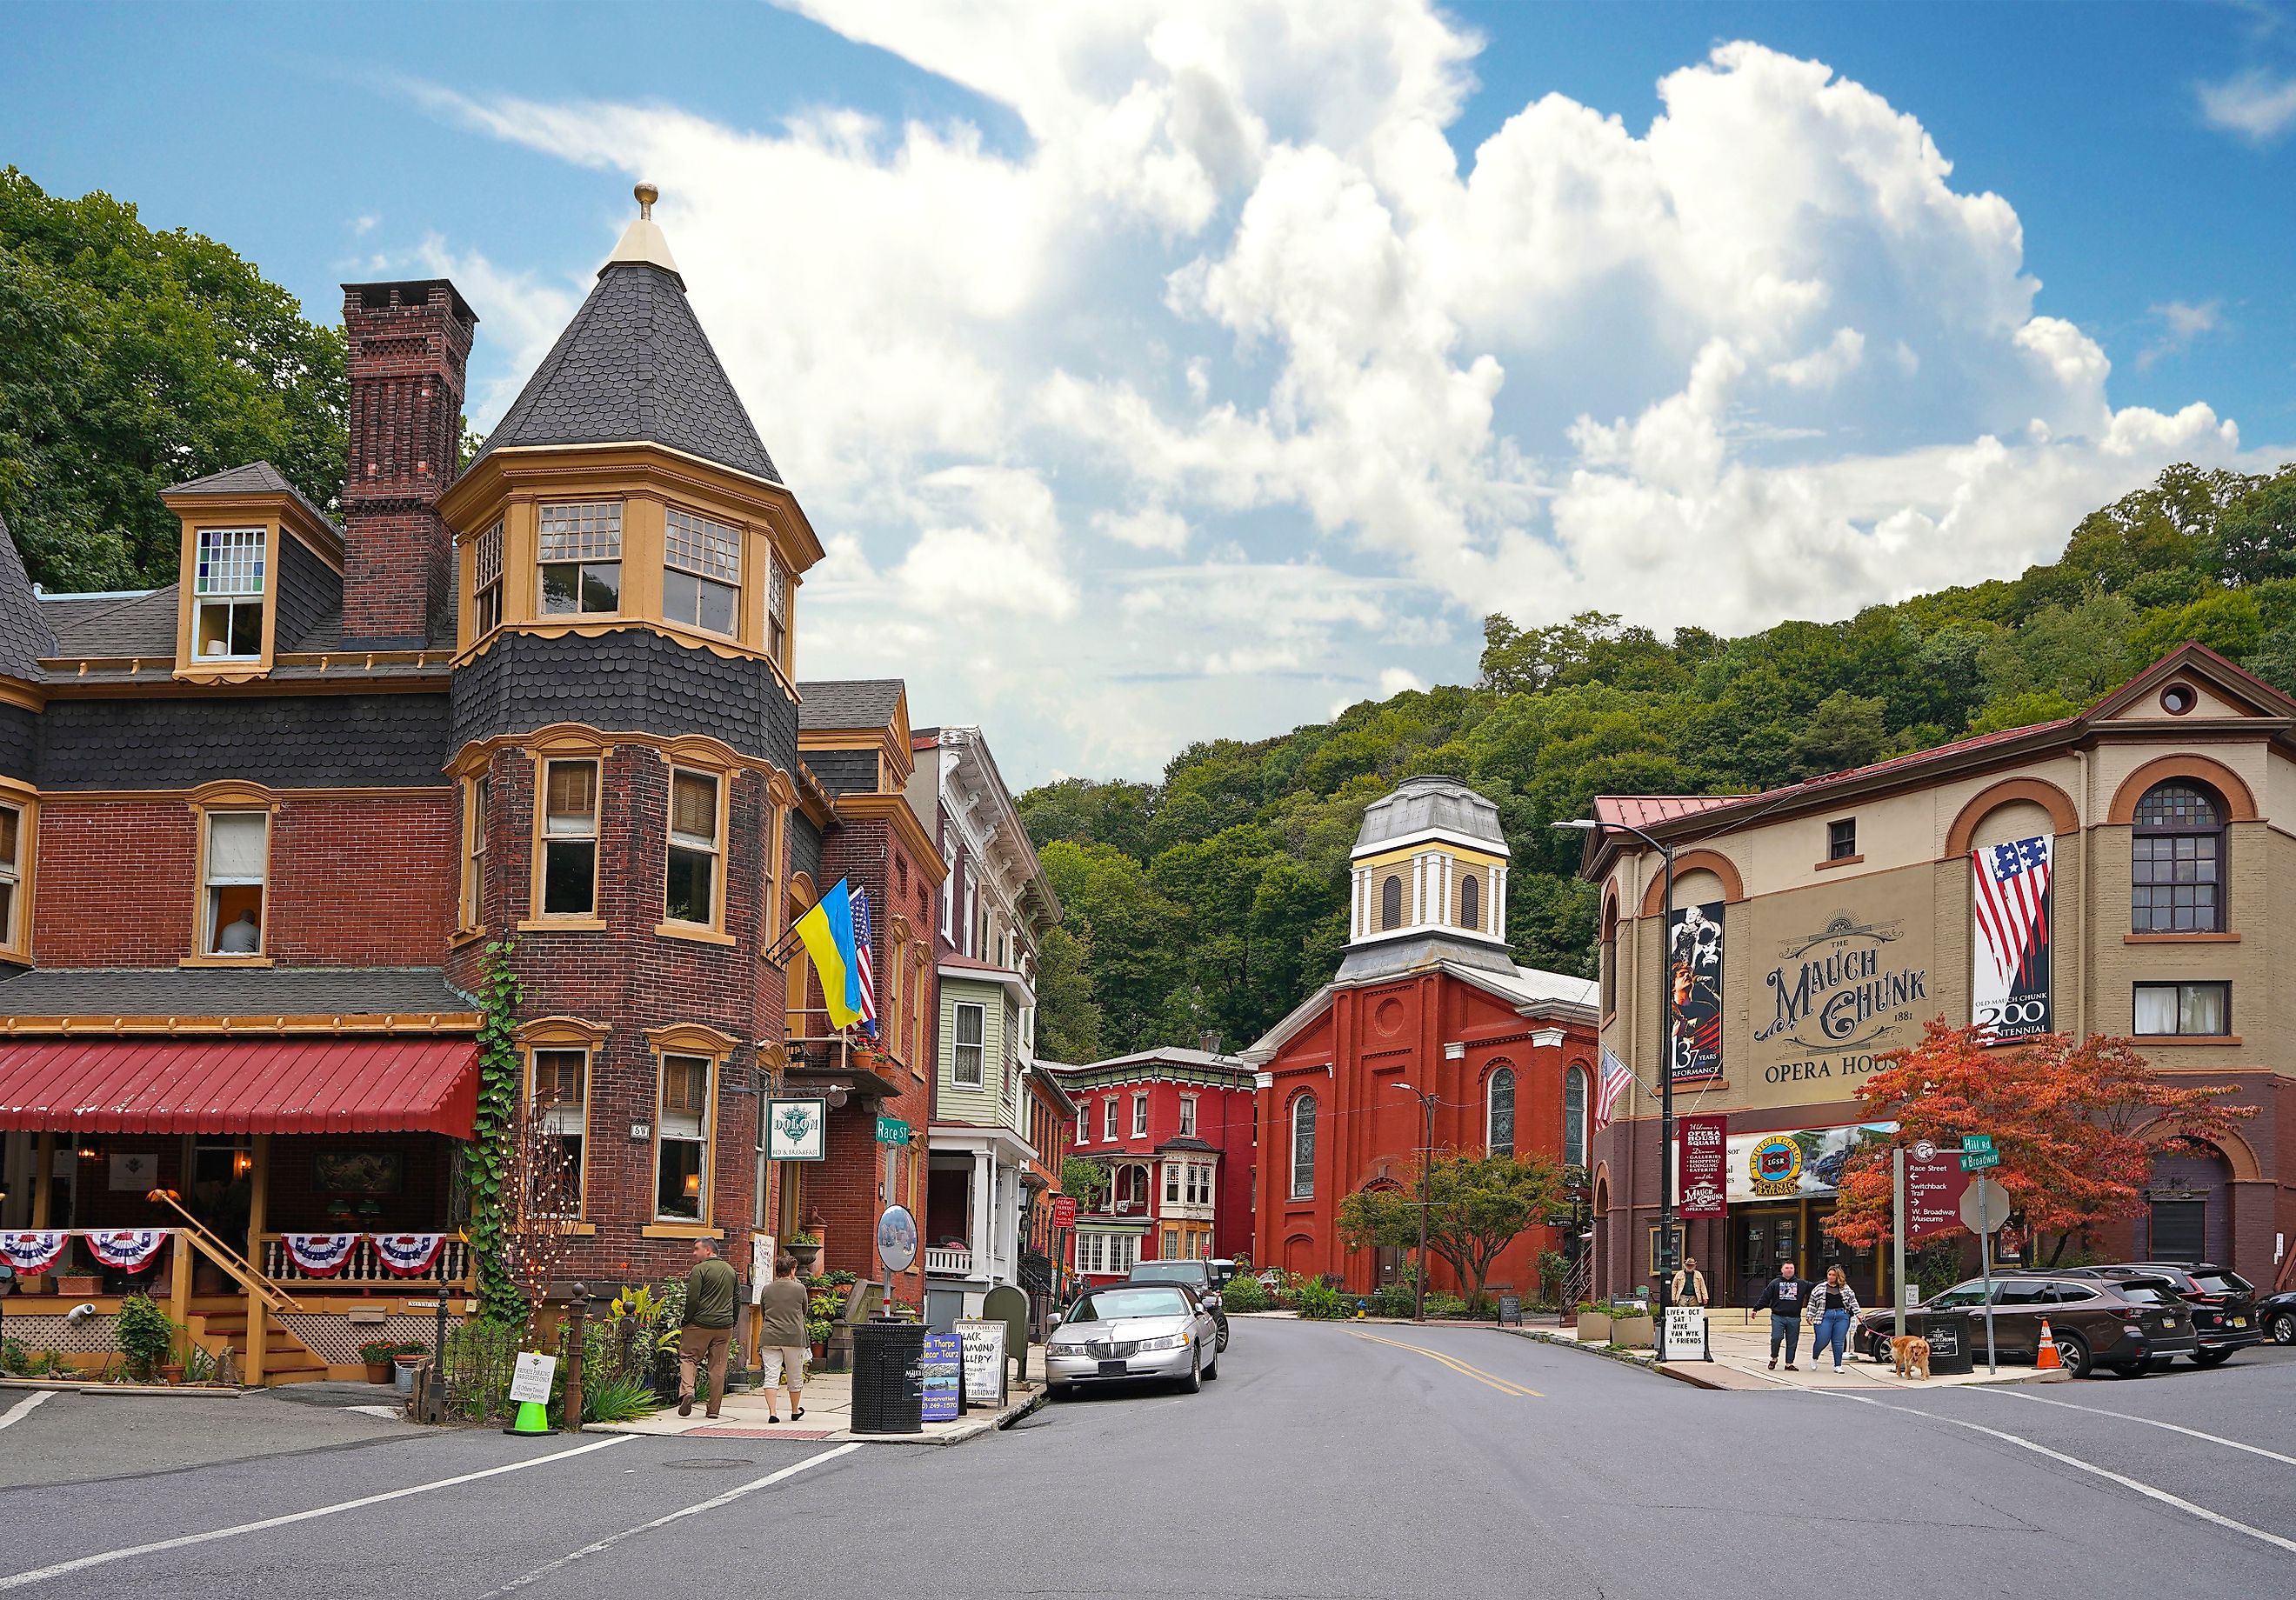 The Mauch Chunk Opera House in historic downtown Jim Thorpe, Pennsylvania. Editorial credit: zimmytws / Shutterstock.com